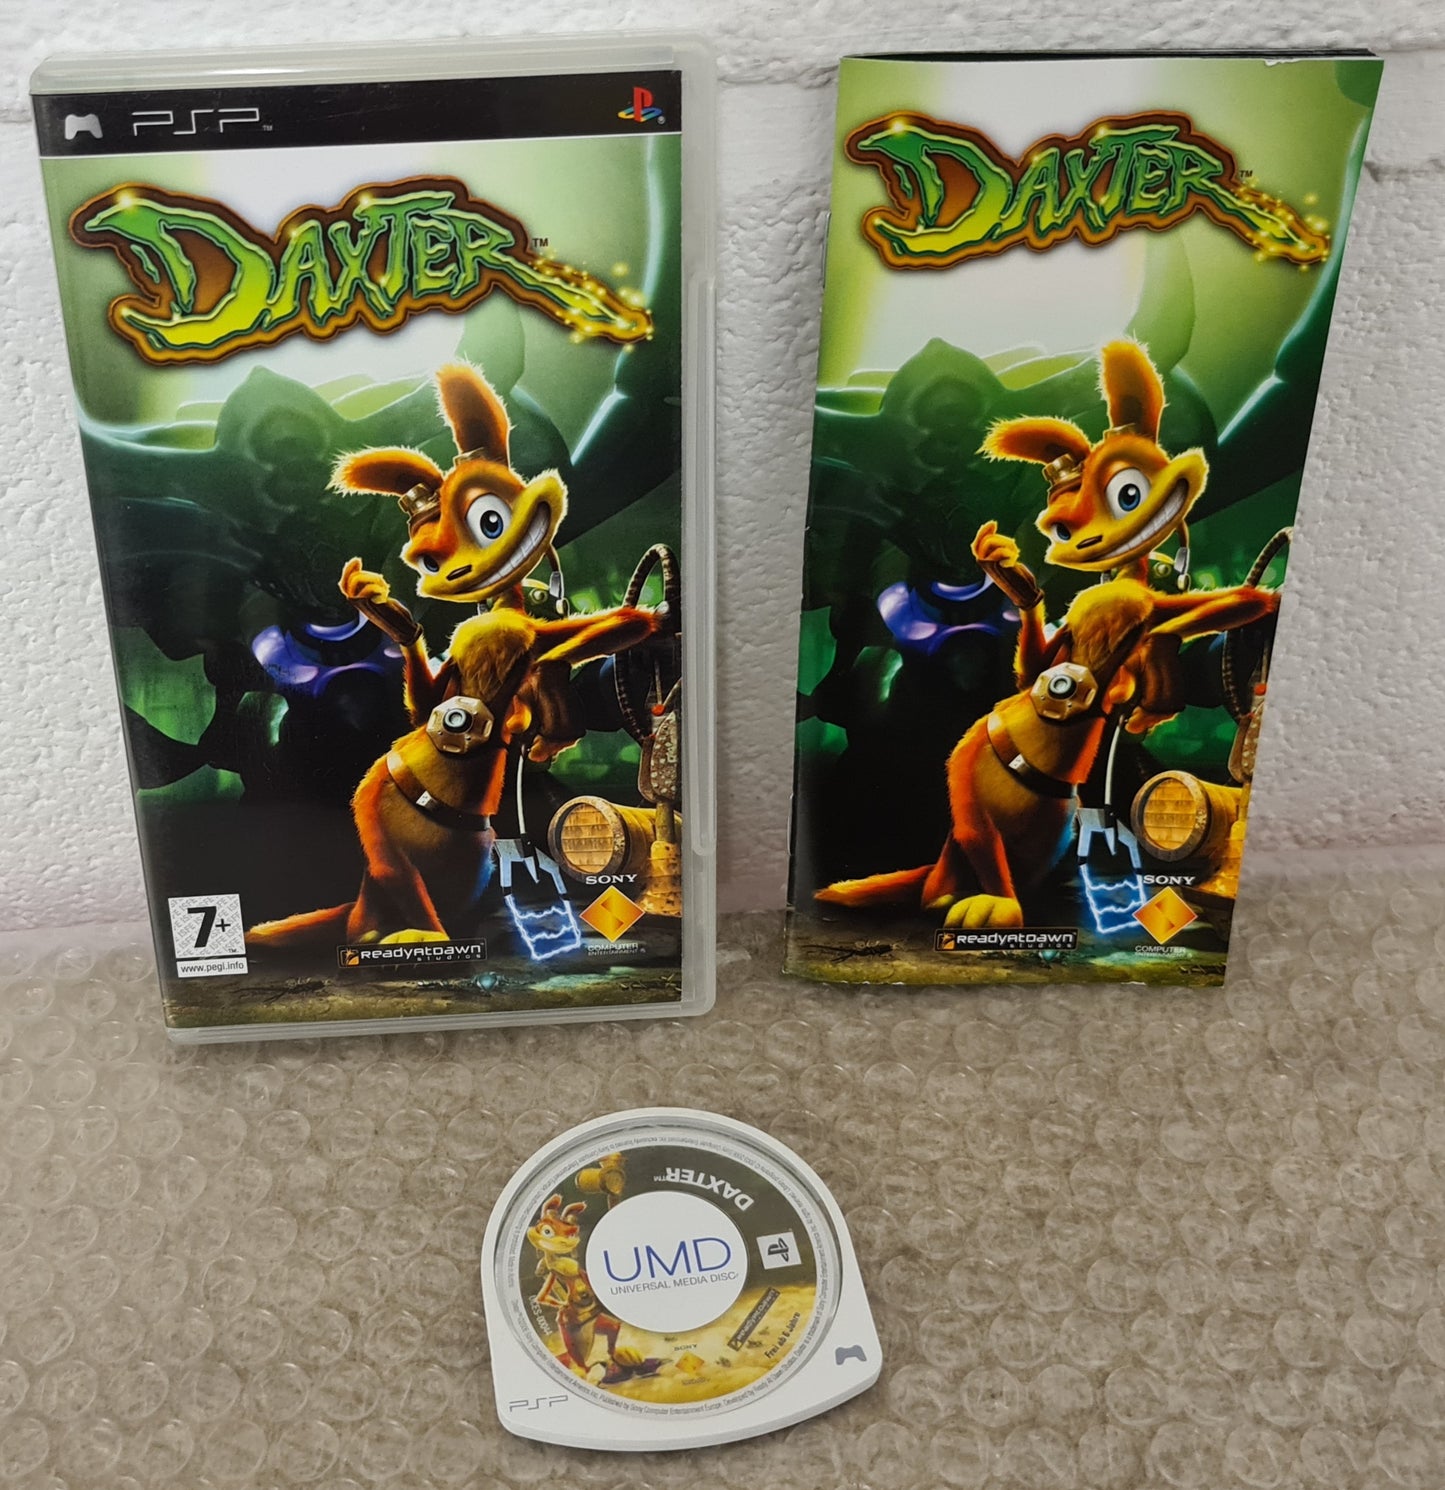 Daxter Sony PSP Game